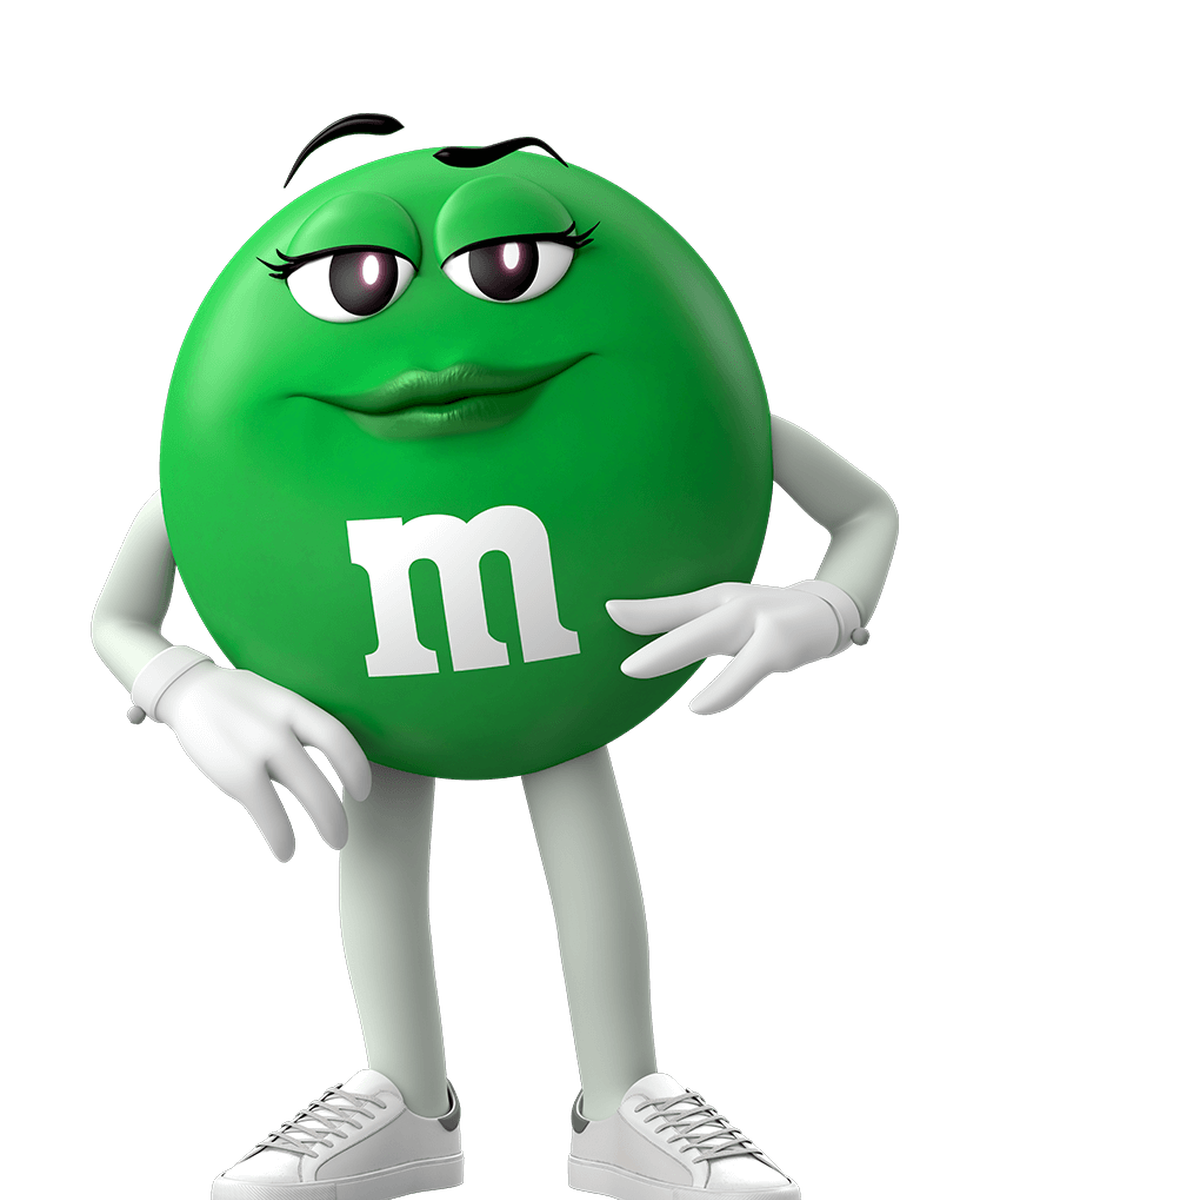 Meet Purple - the new M&M spokescandy character